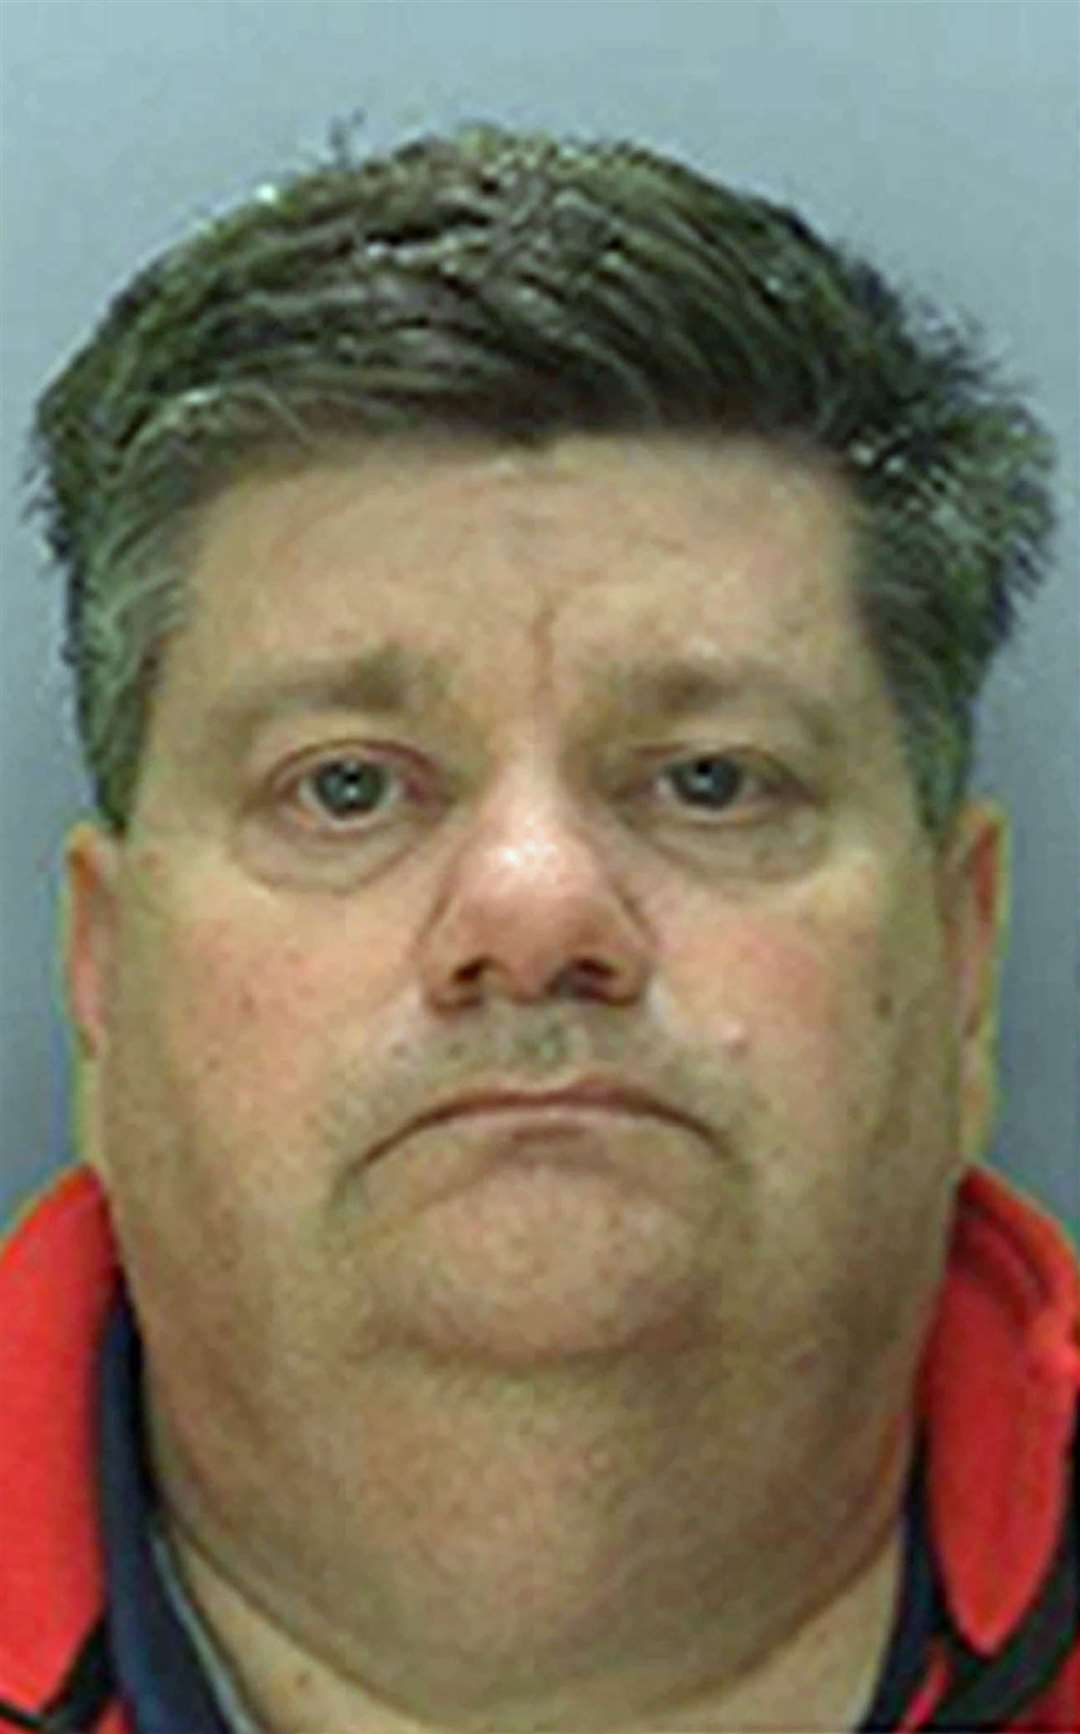 Carl Beech, known as Nick, was jailed for false claims of a Westminster paedophile ring (CPS handout/PA)